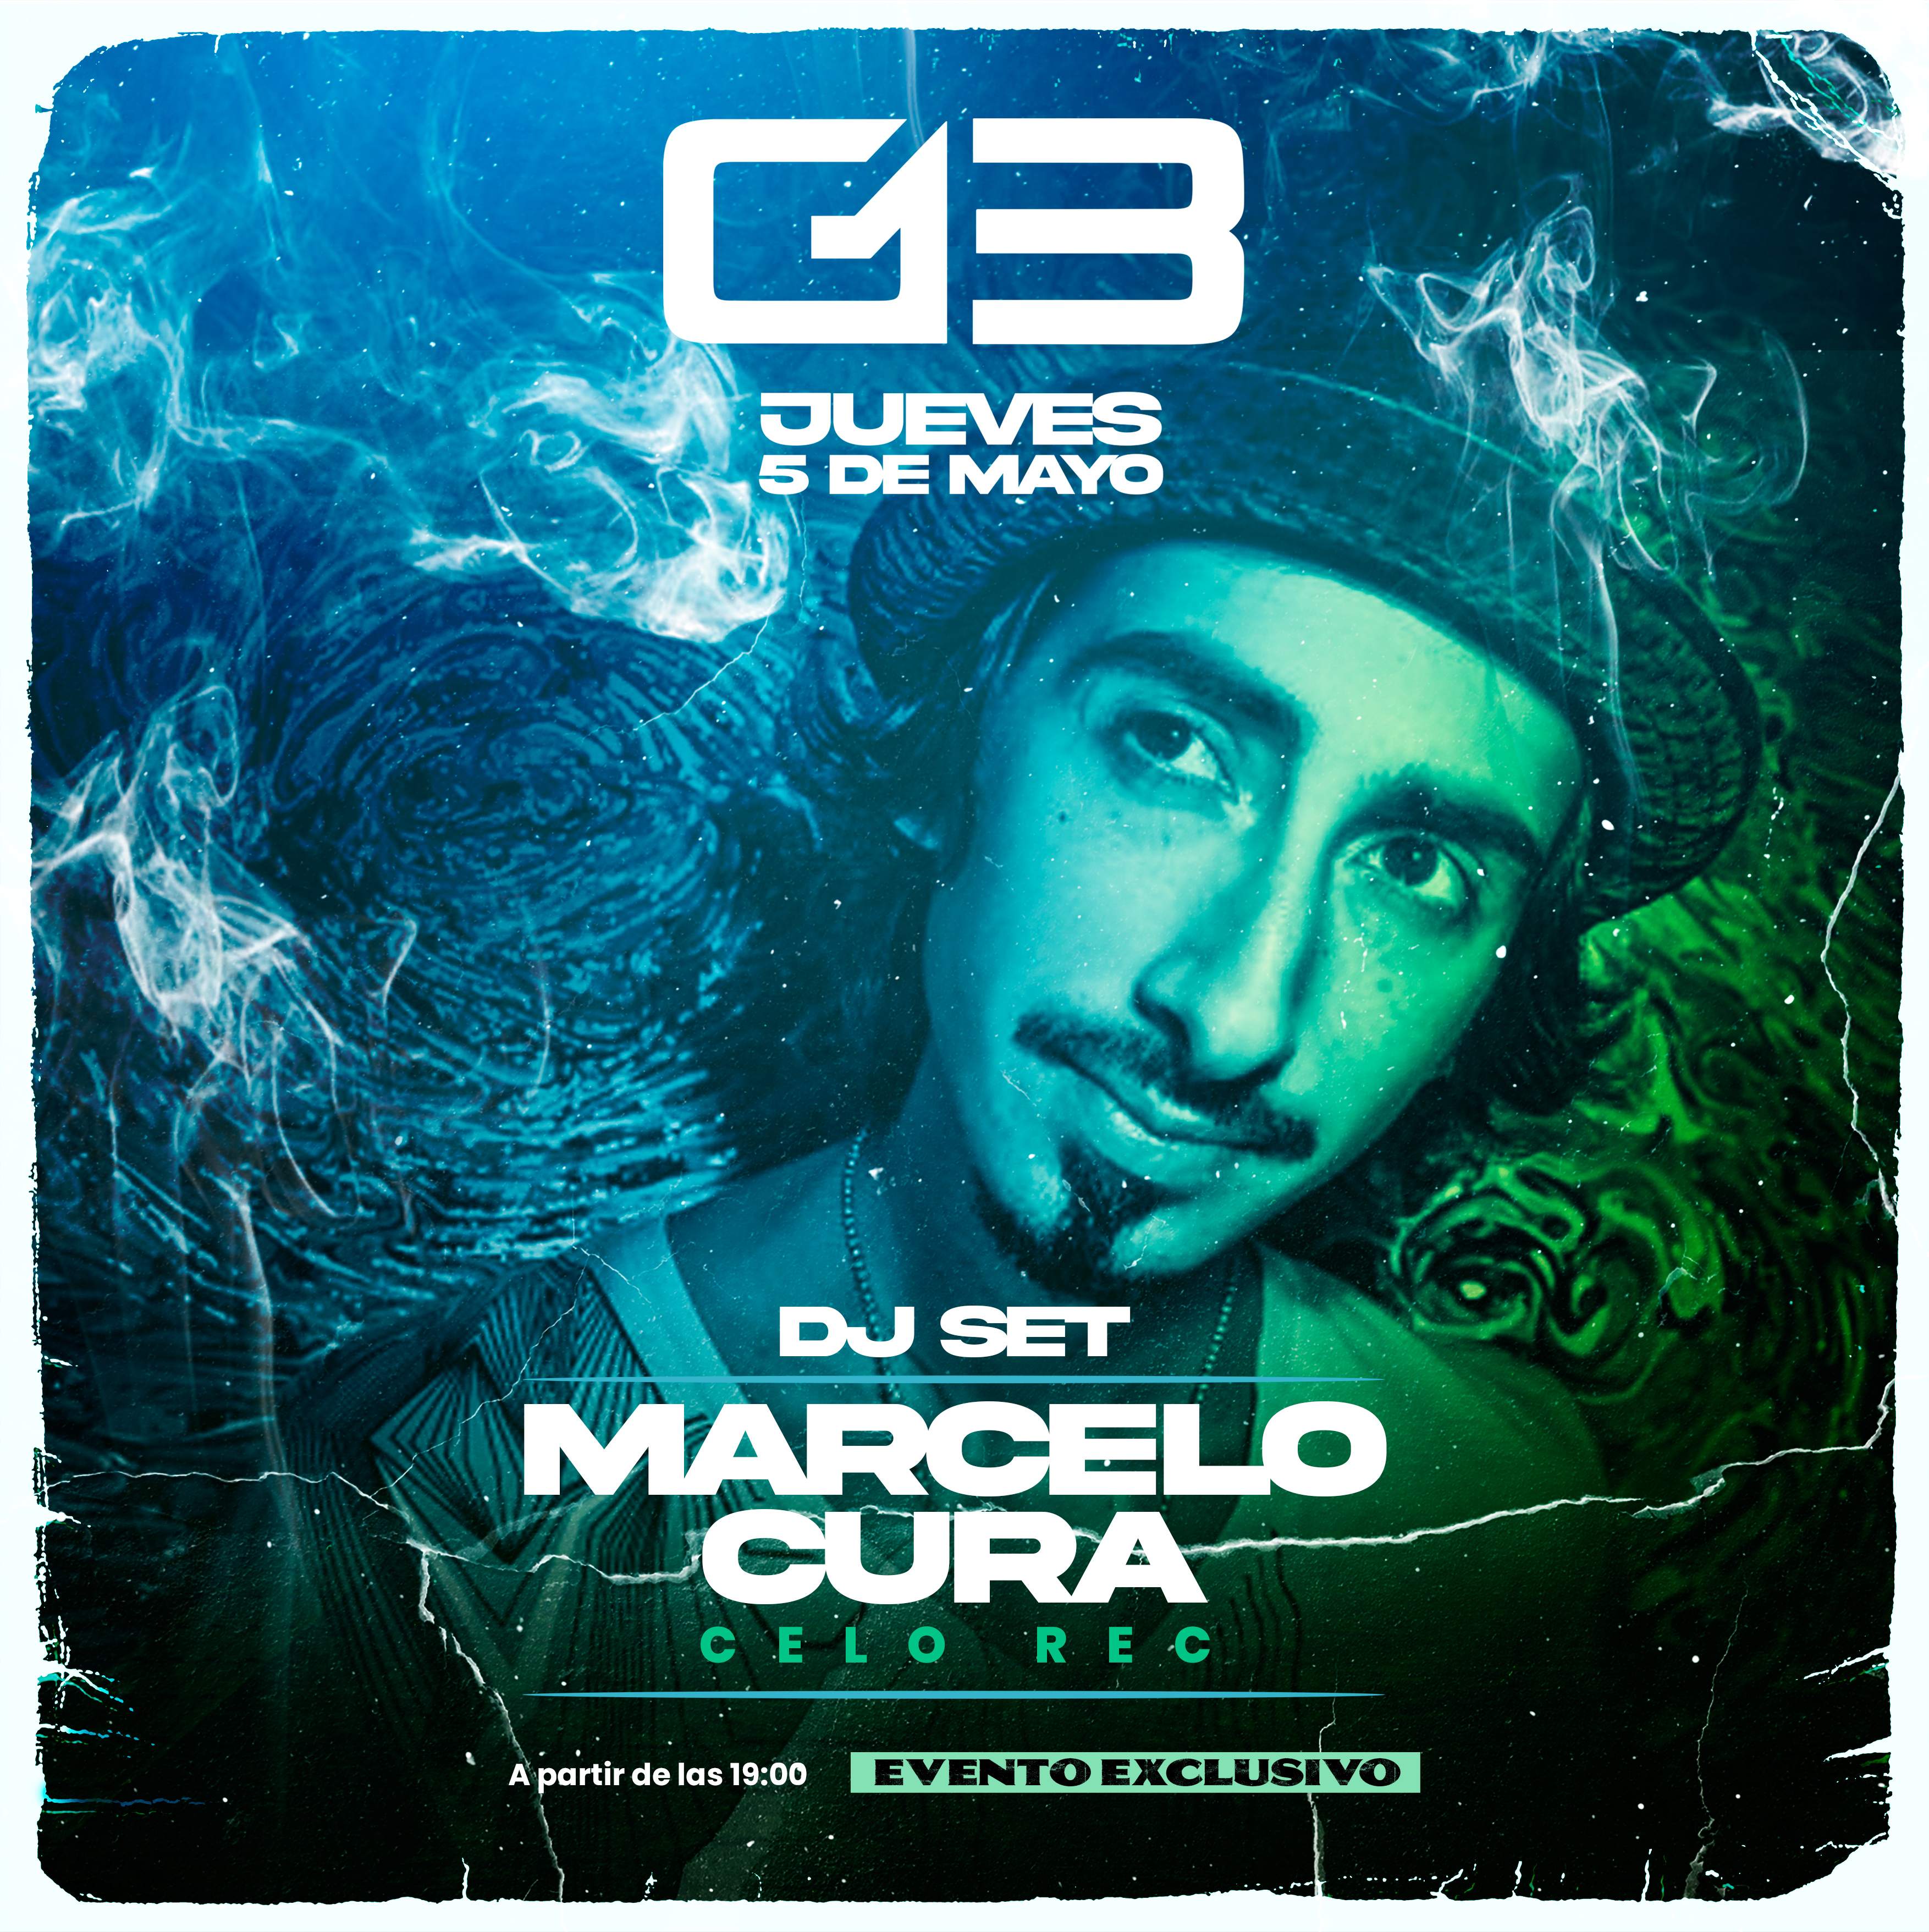 MARCELO CURA at G13 WEED CLUB - フライヤー表